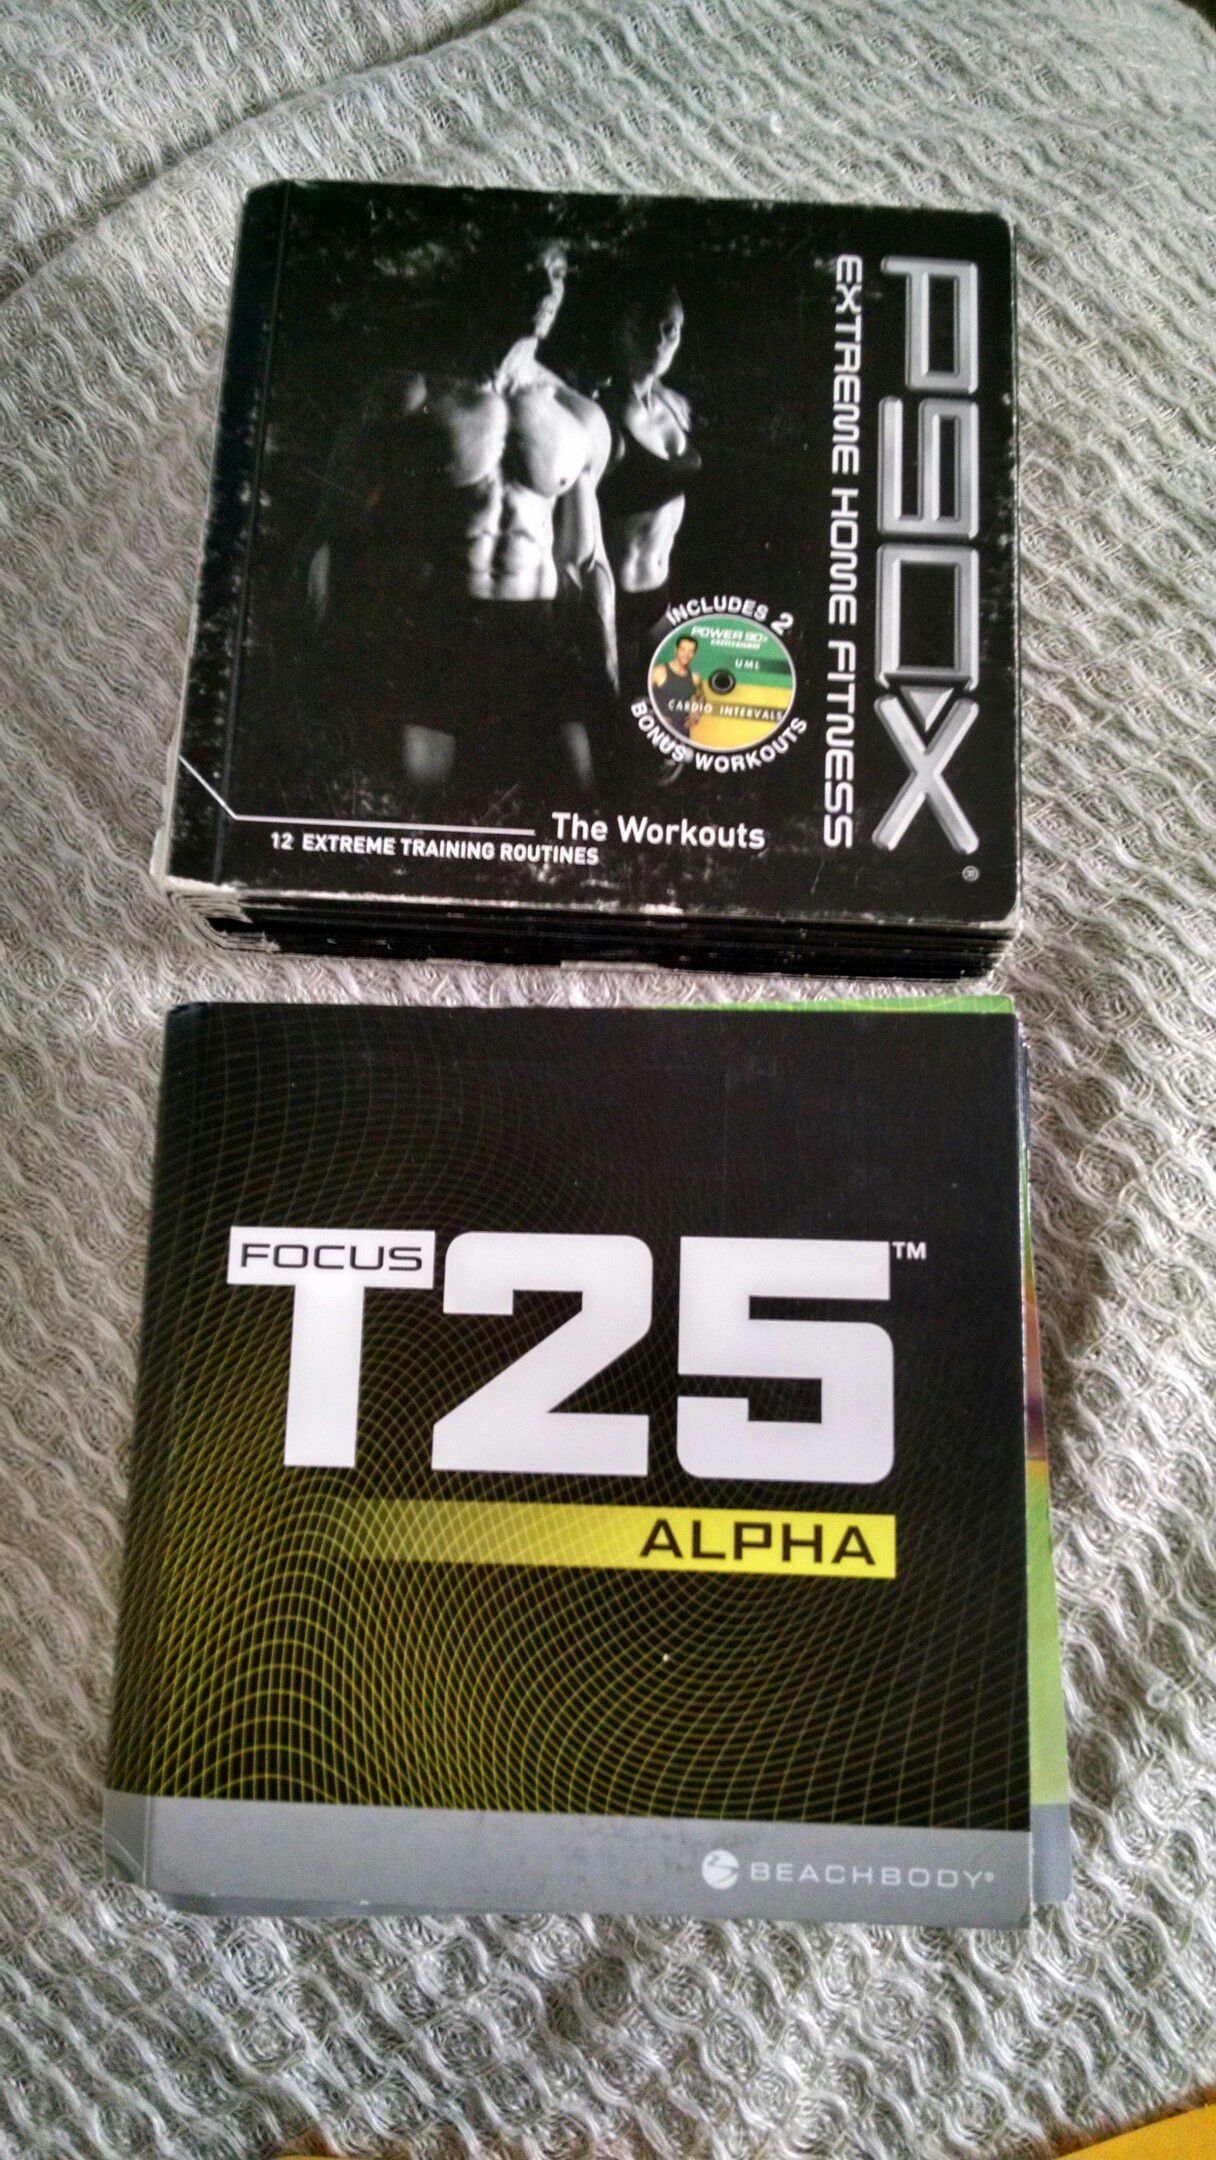 P90x and T25 workout dvd sets